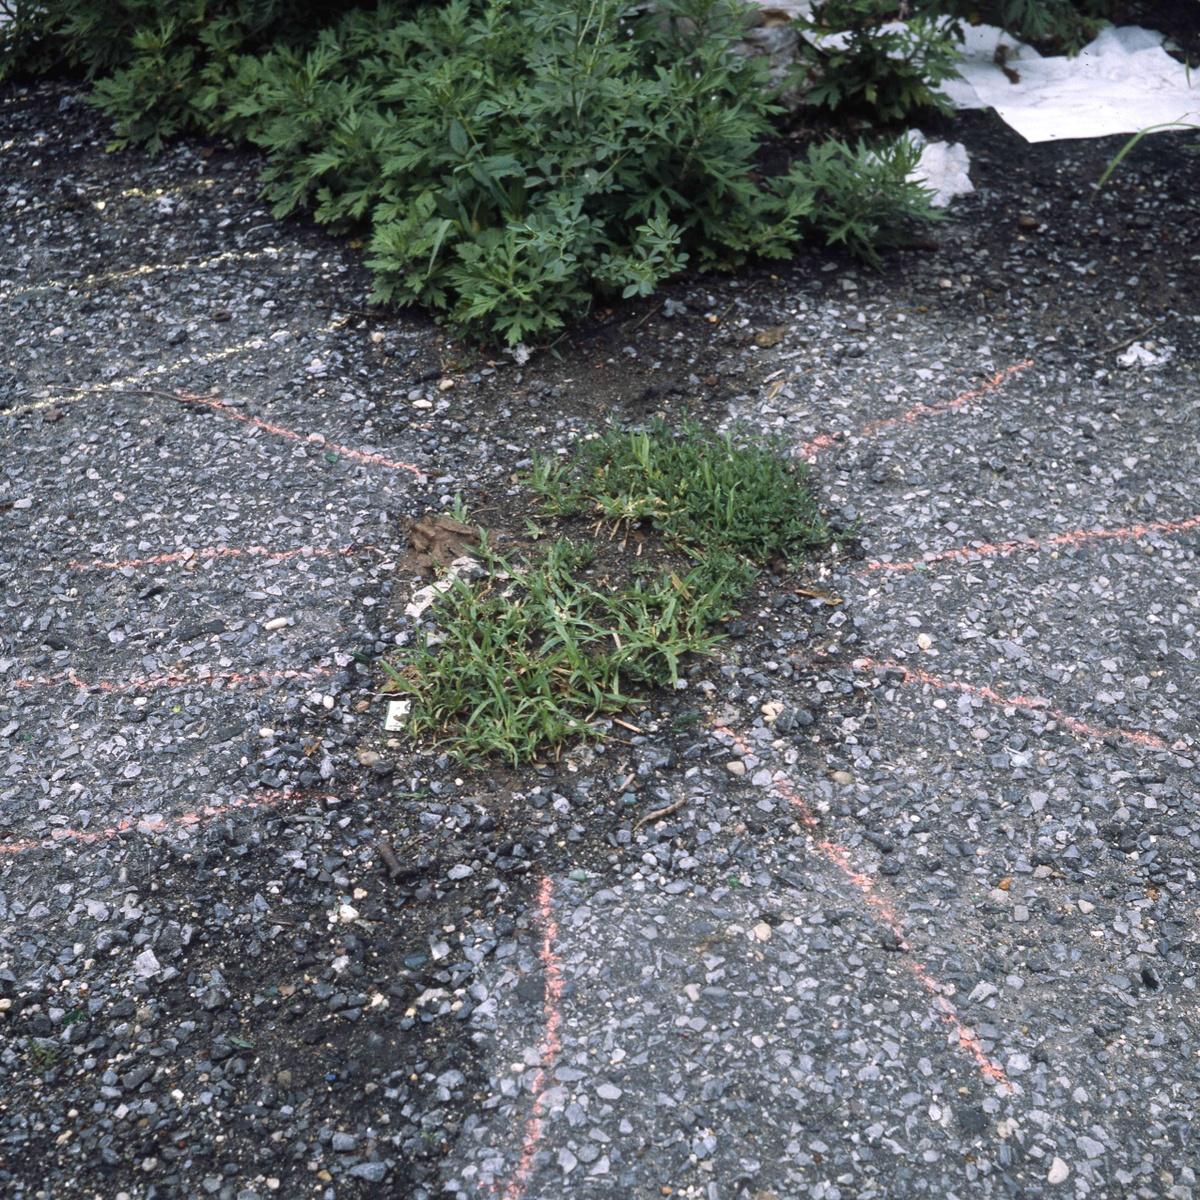 Salmon colored sunray-like chalk lines radiate from a small patch of grass pushing through neglected asphalt.